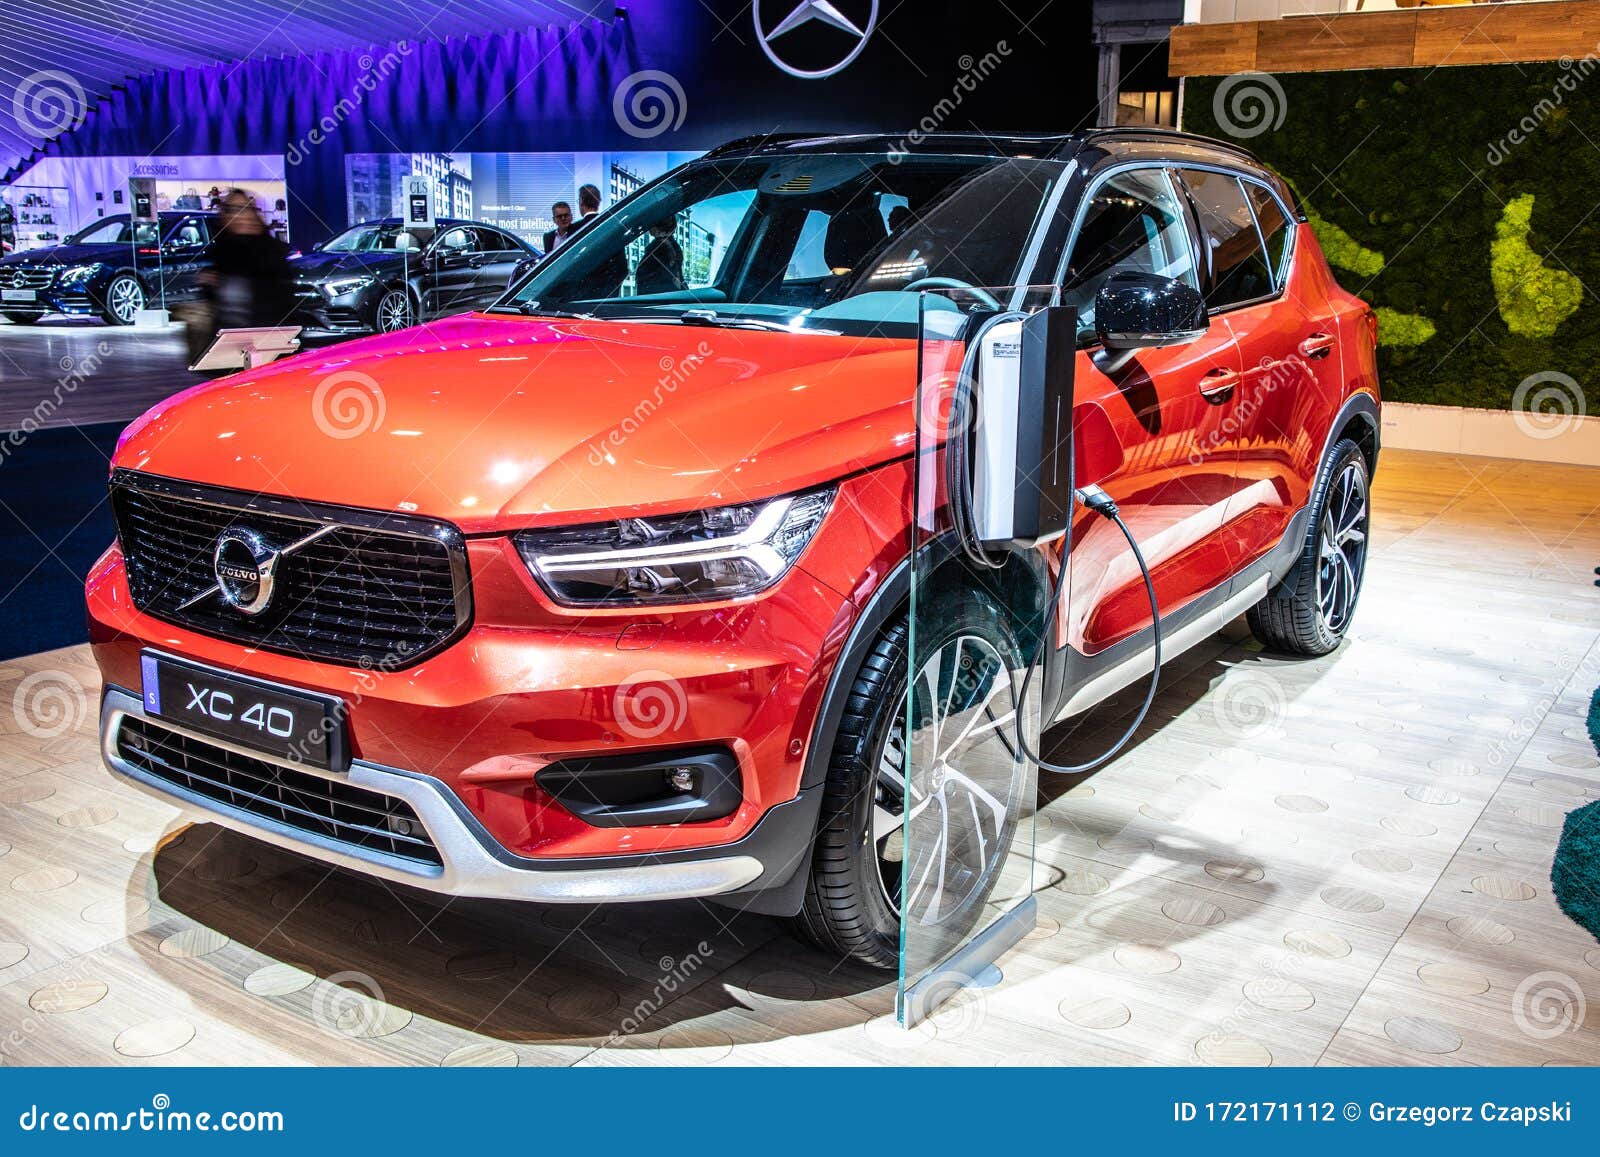 Volvo Xc40 At Brussels Motor Show Compact Crossover Suv Manufactured And Marketed By Volvo Cars Editorial Photography Image Of Autoshow Business 172171112